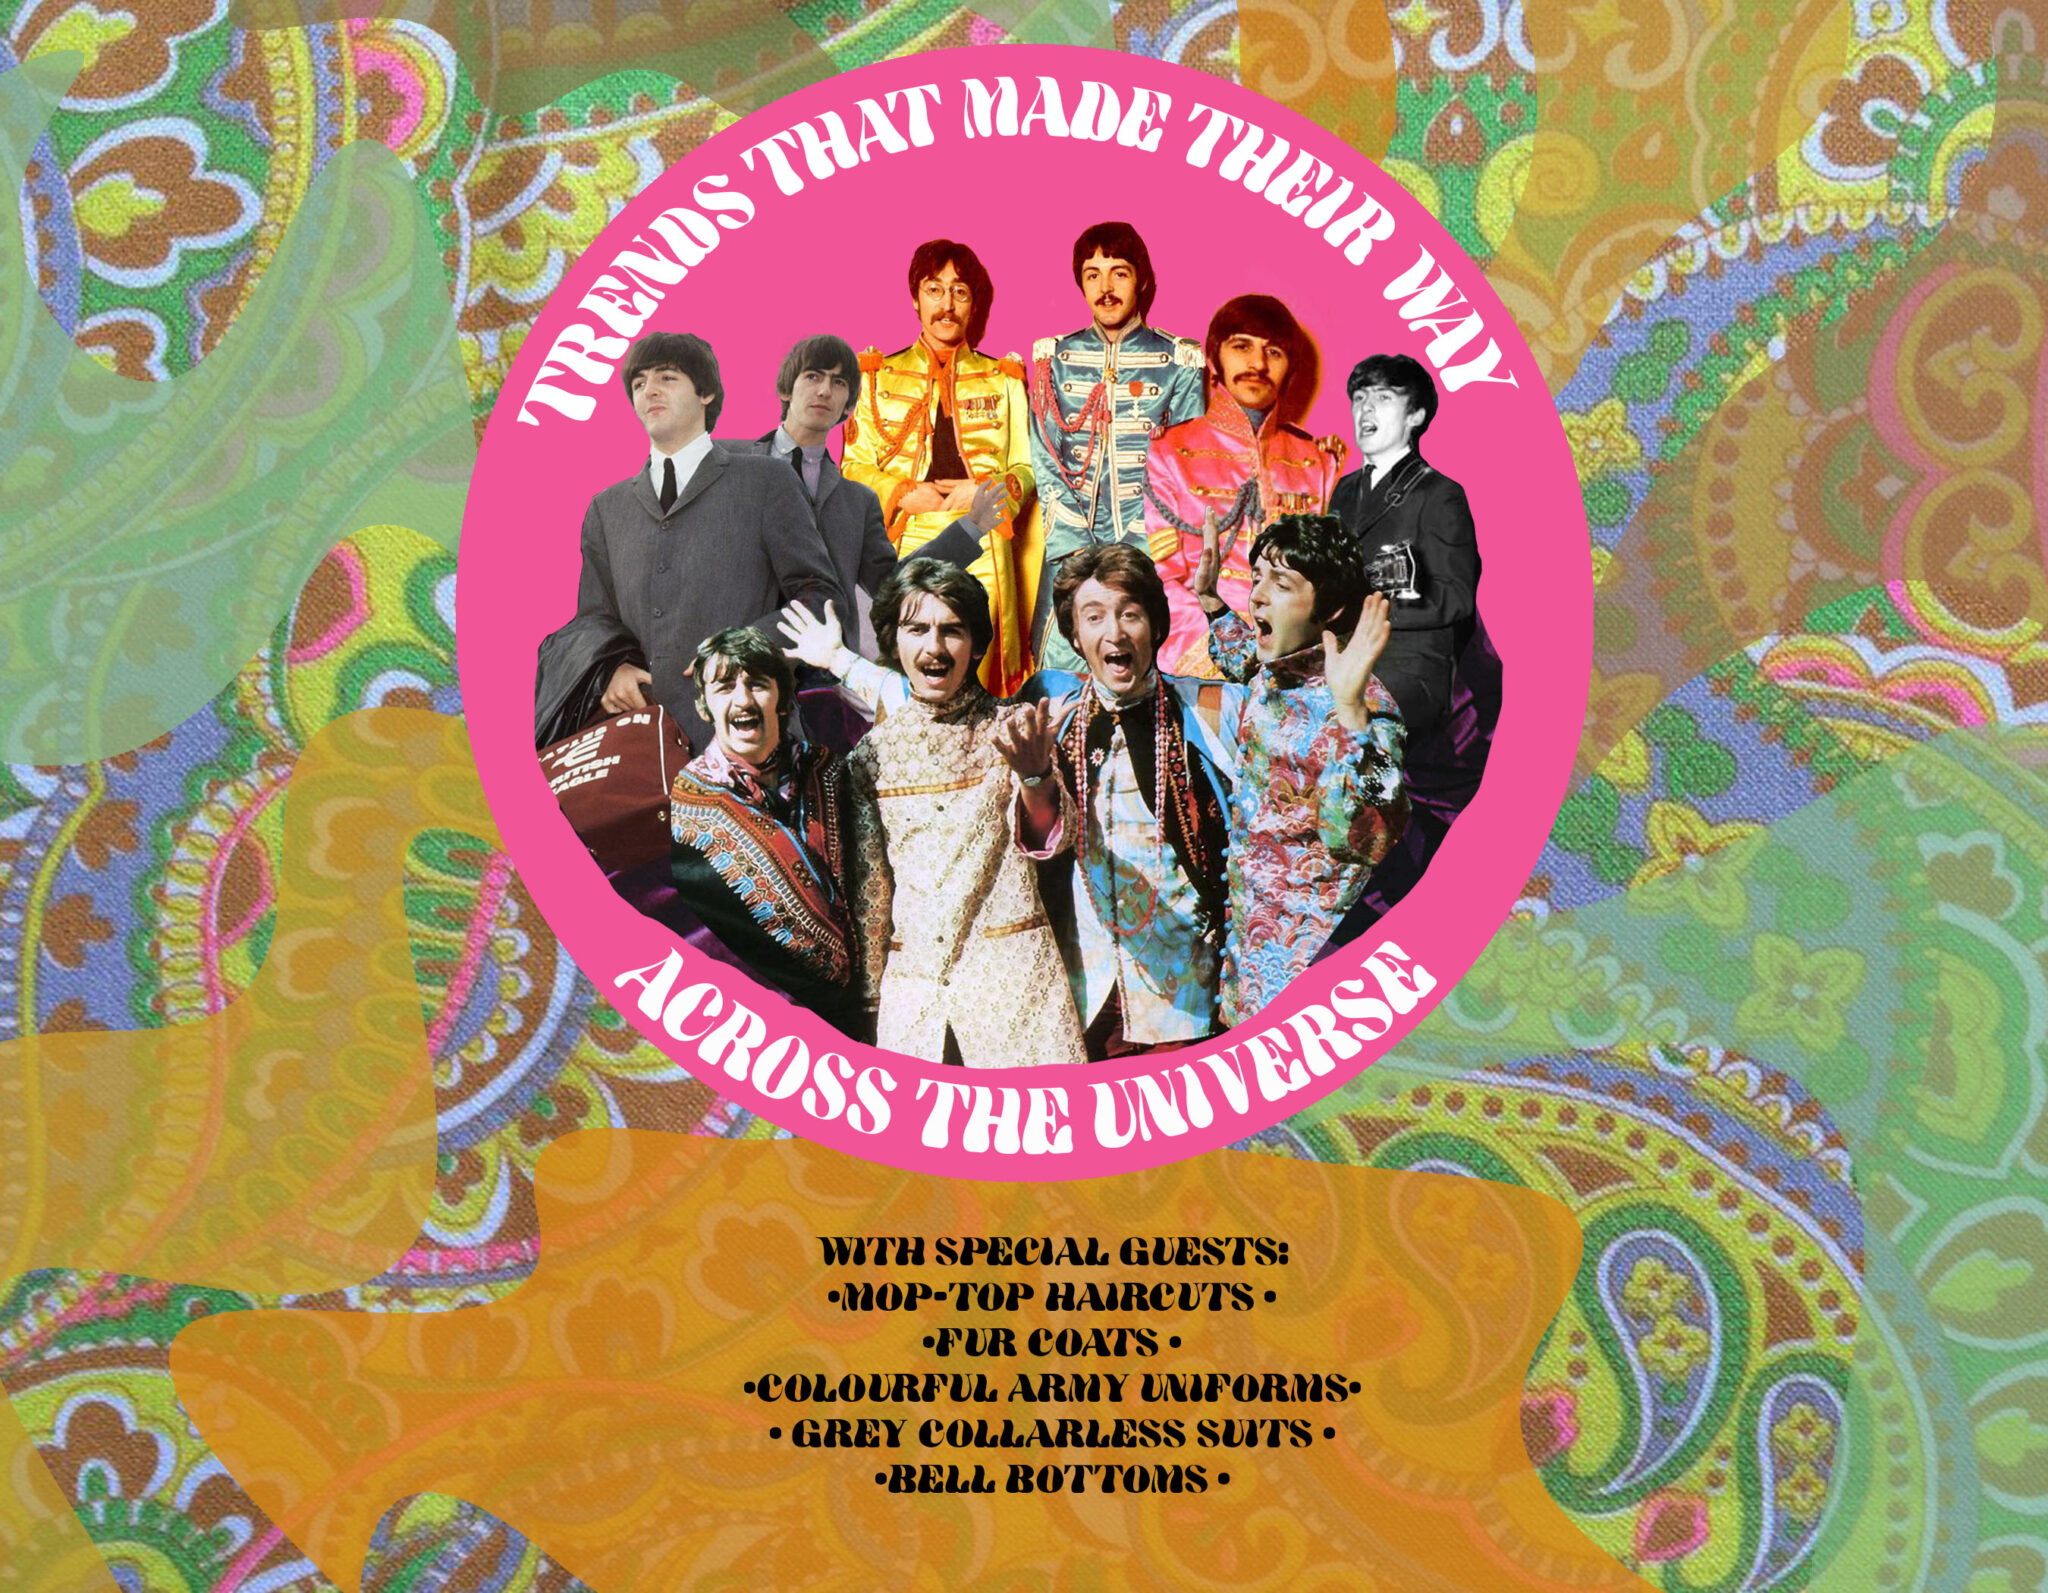 Psychedelic-themed poster with photographs of The Beatles in the centre. Text below lists trends that the band is known for.